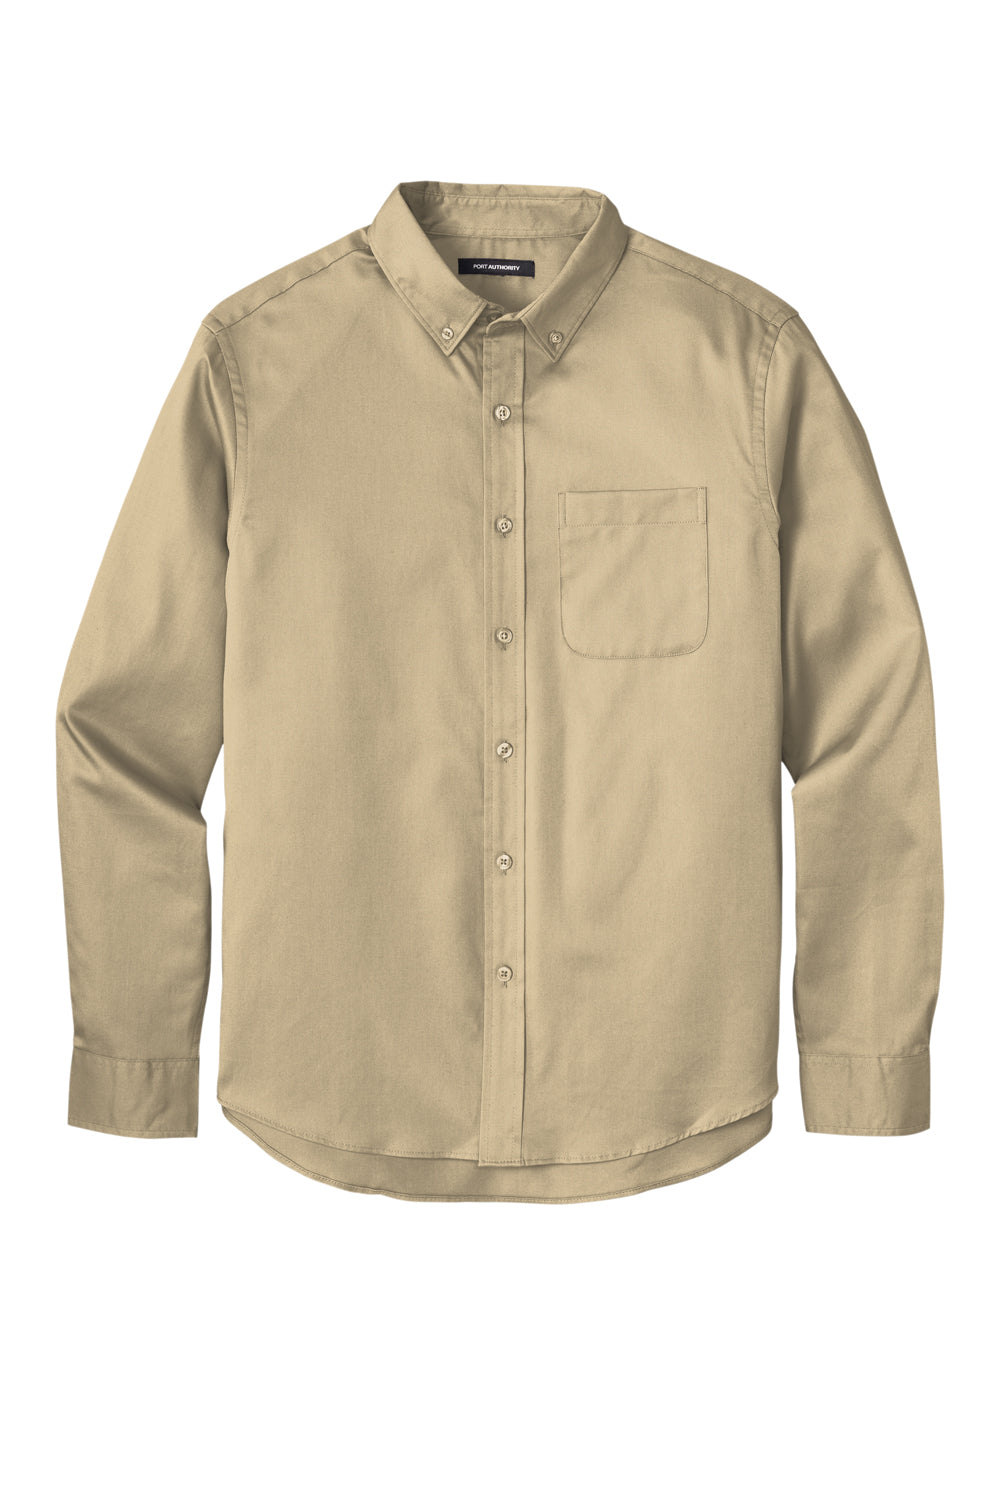 Port Authority W808 SuperPro Wrinkle Resistant React Long Sleeve Button Down Shirt w/ Pocket Wheat Flat Front